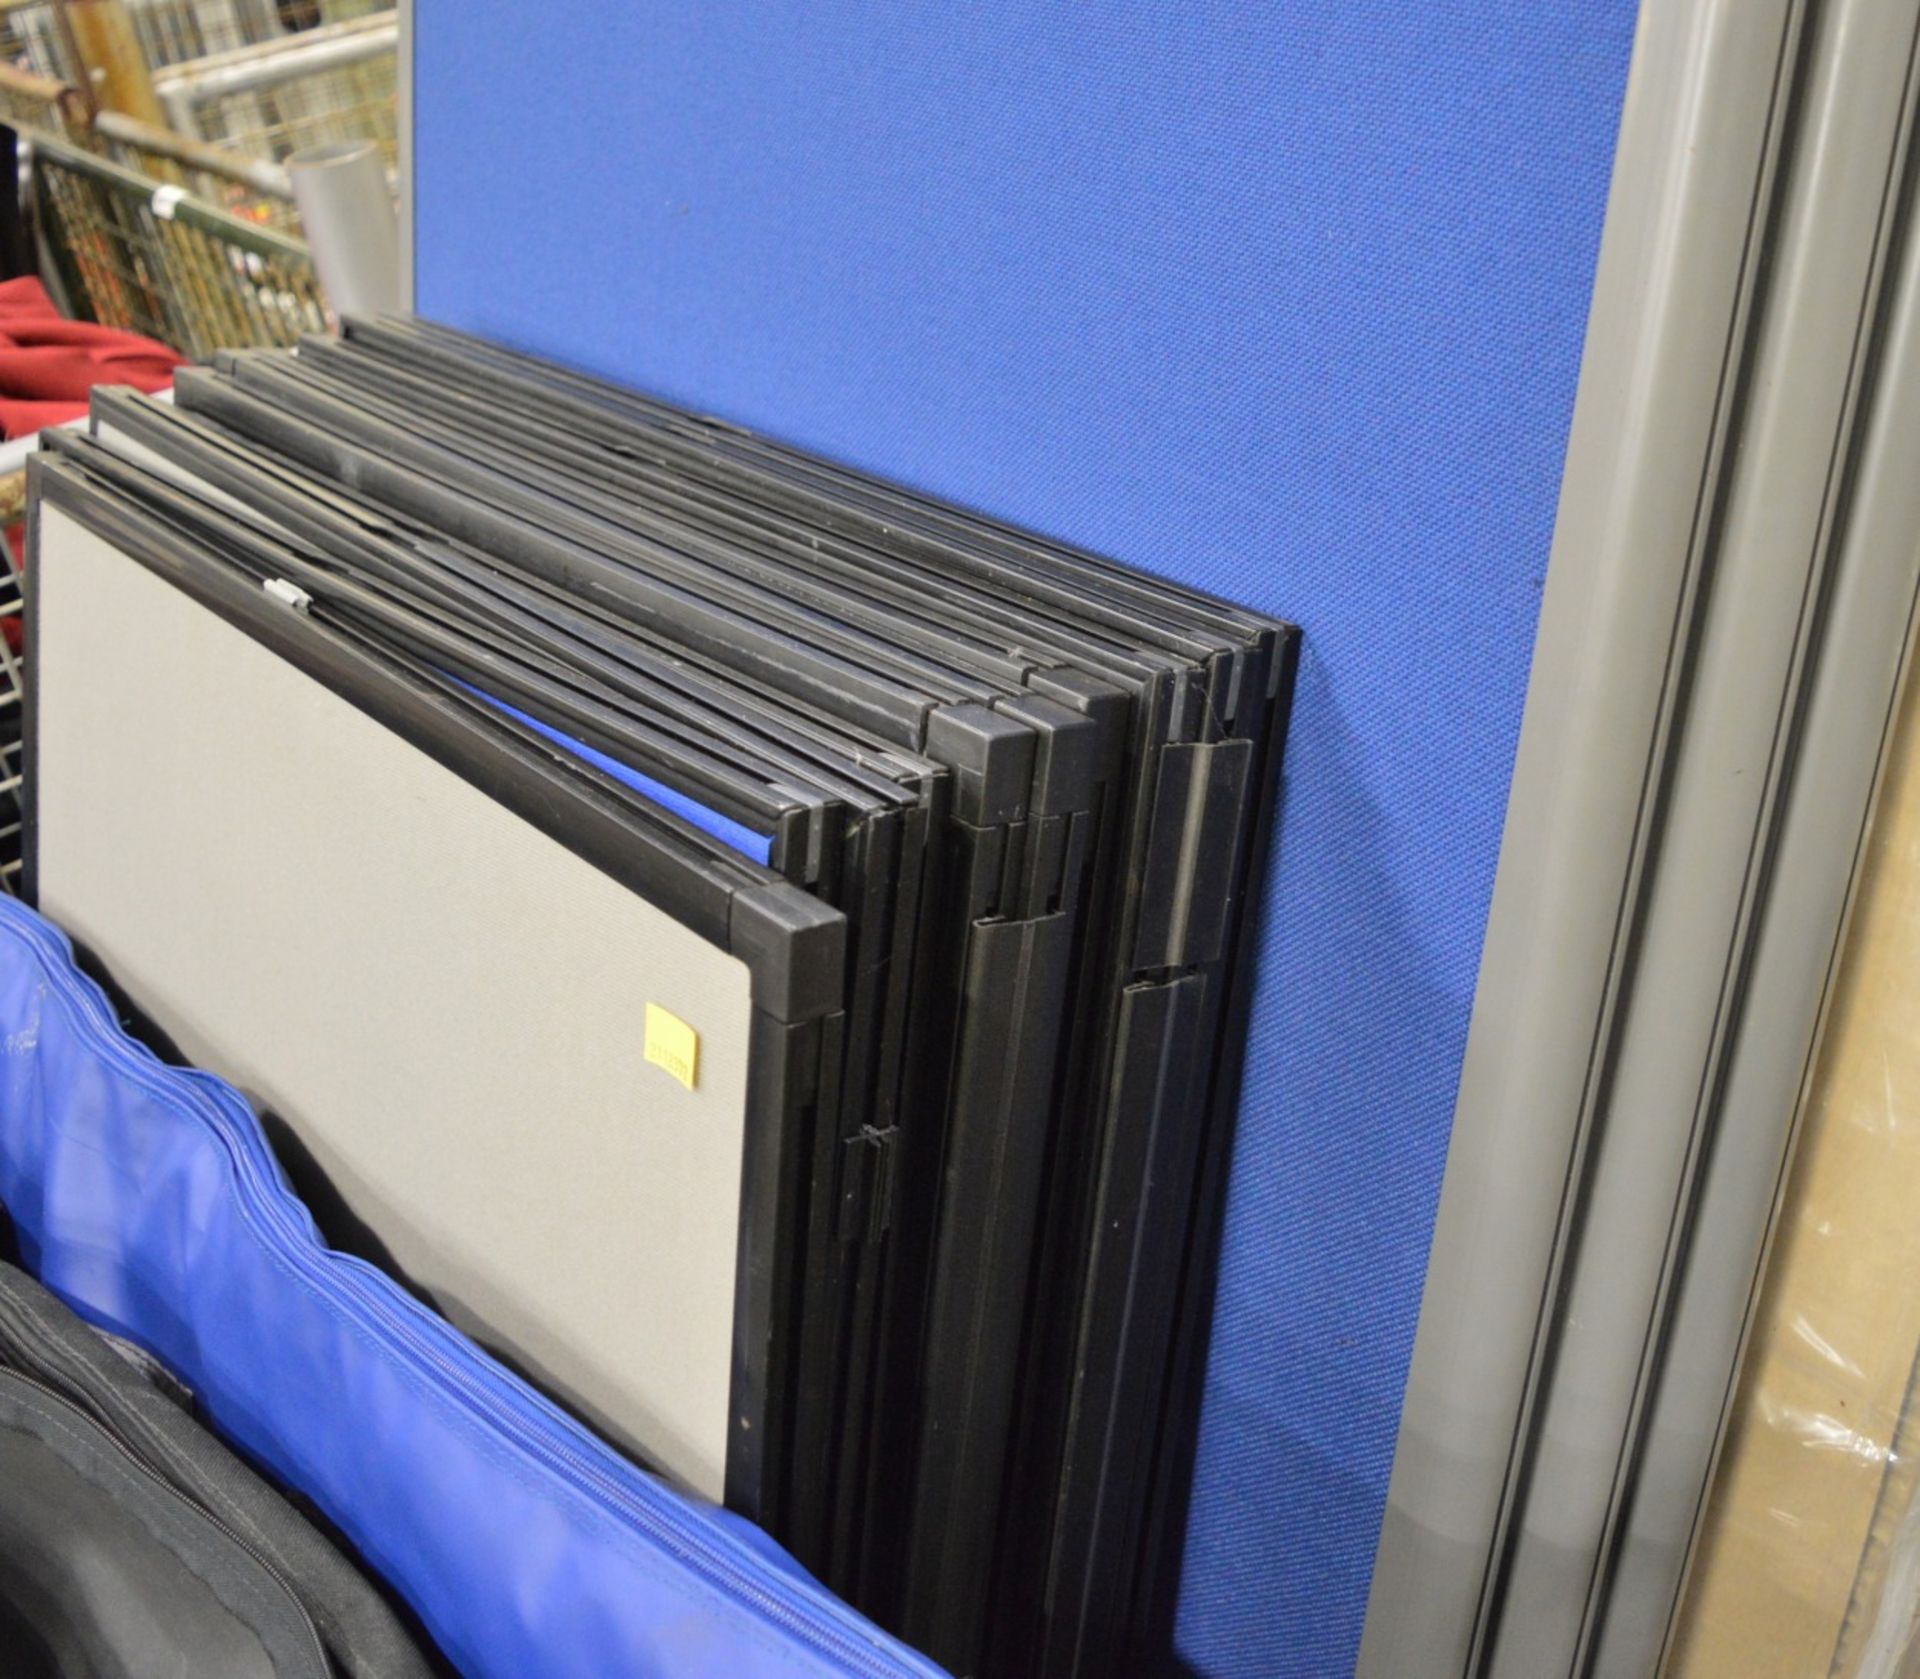 4x Notice Boards 1400mm x 800mm, 10x Notice Boards 900mm x 600mm, 3x Easels in Carry Bags - Image 2 of 2